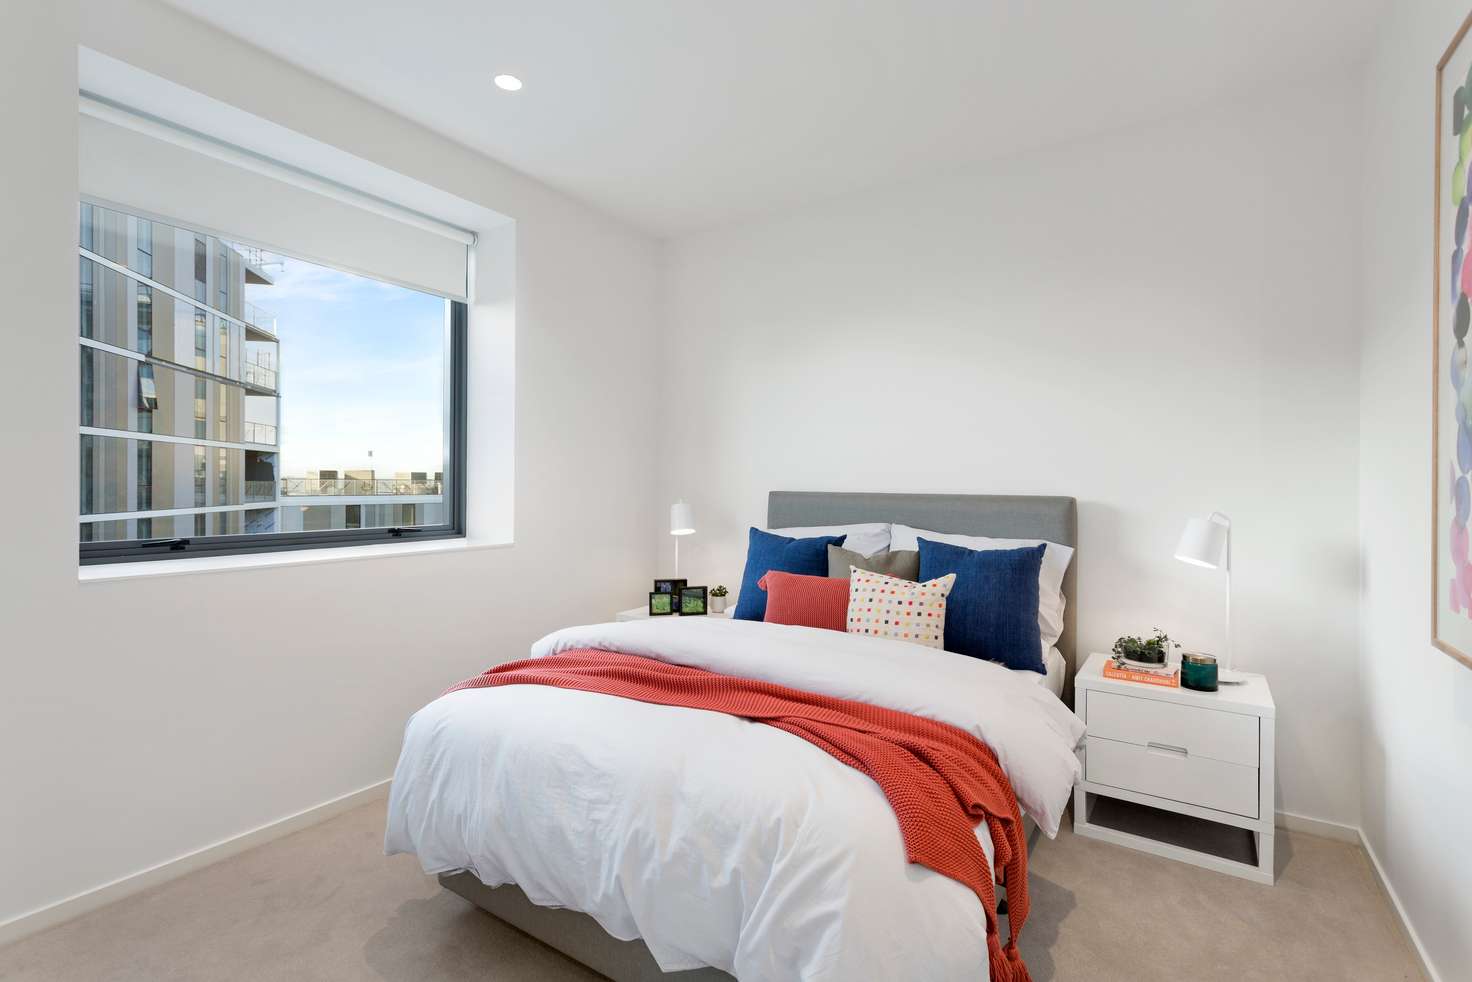 Main view of Homely apartment listing, 6A-104/590 Evergreen Mews, Armadale VIC 3143